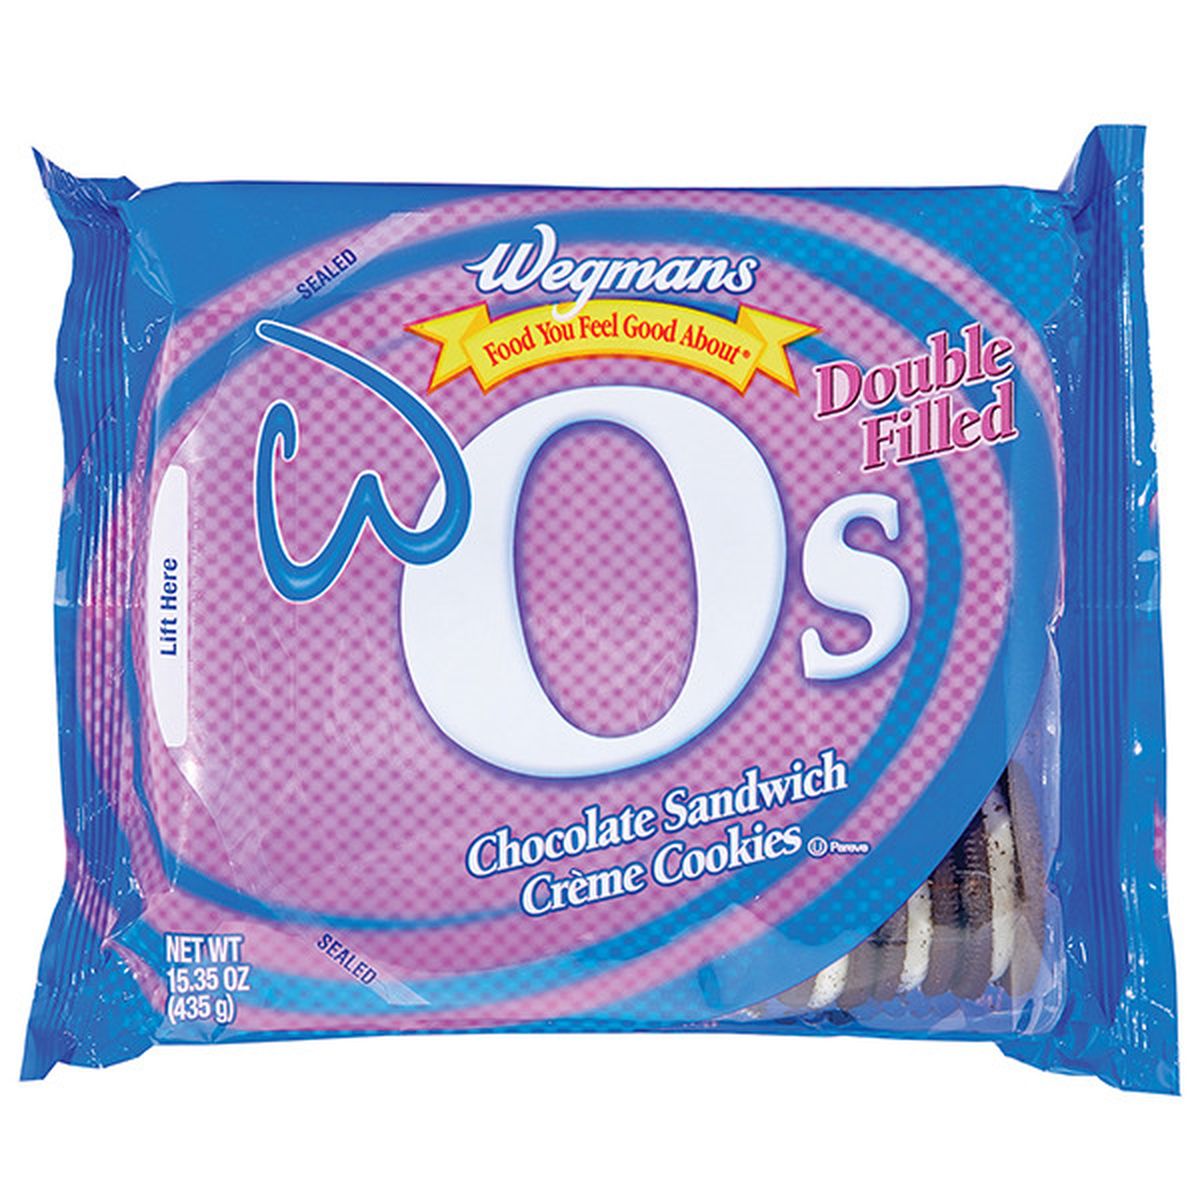 Calories in Wegmans Double Filled Original W O's: CrÃ¨me-Filled Chocolate Sandwich Cookies